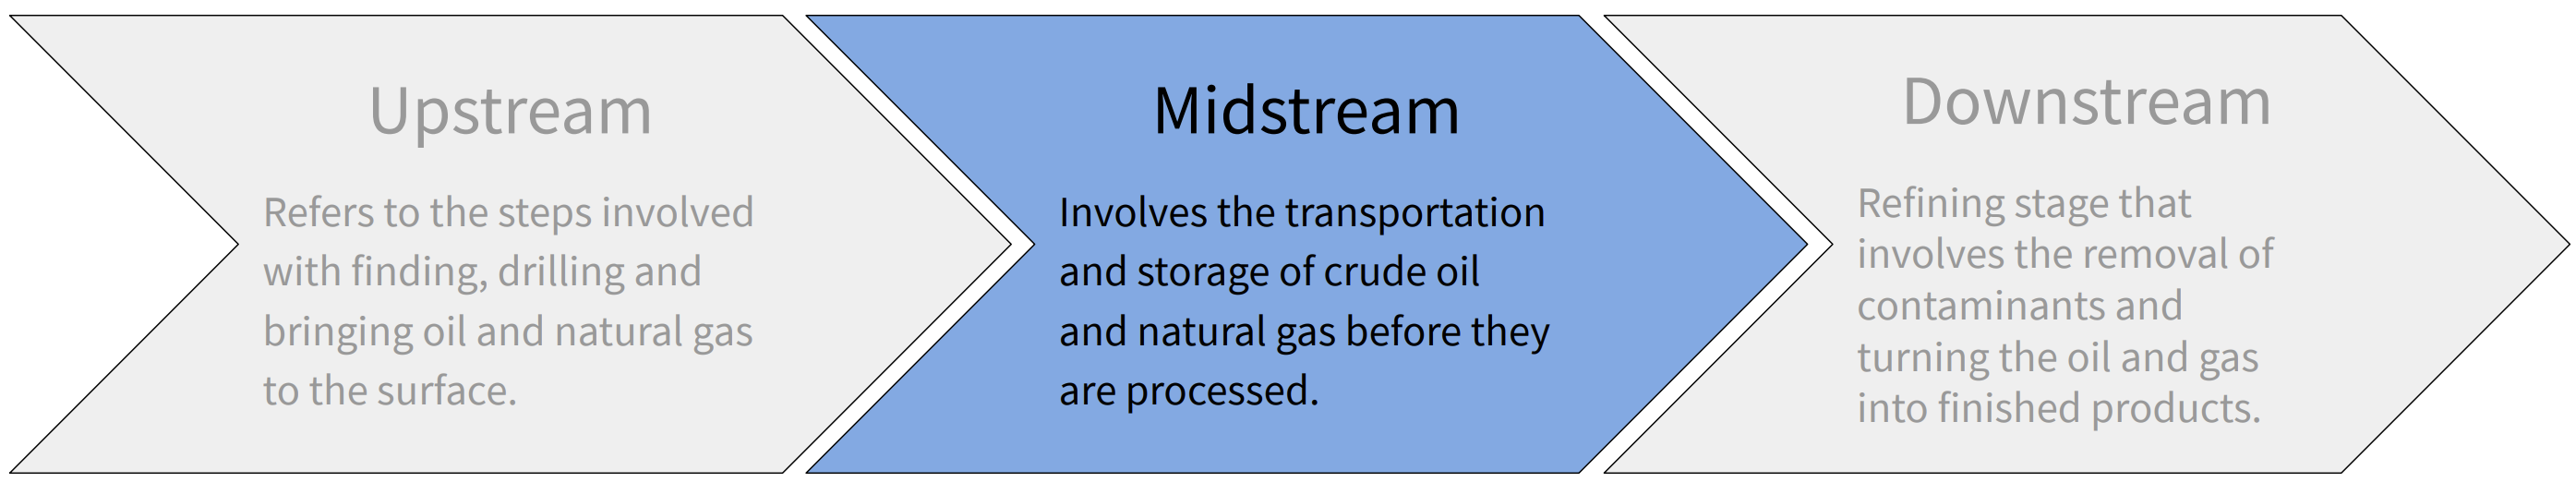 Infographic showing the three stages of the oil & gas industry with the midstream stage highlighted